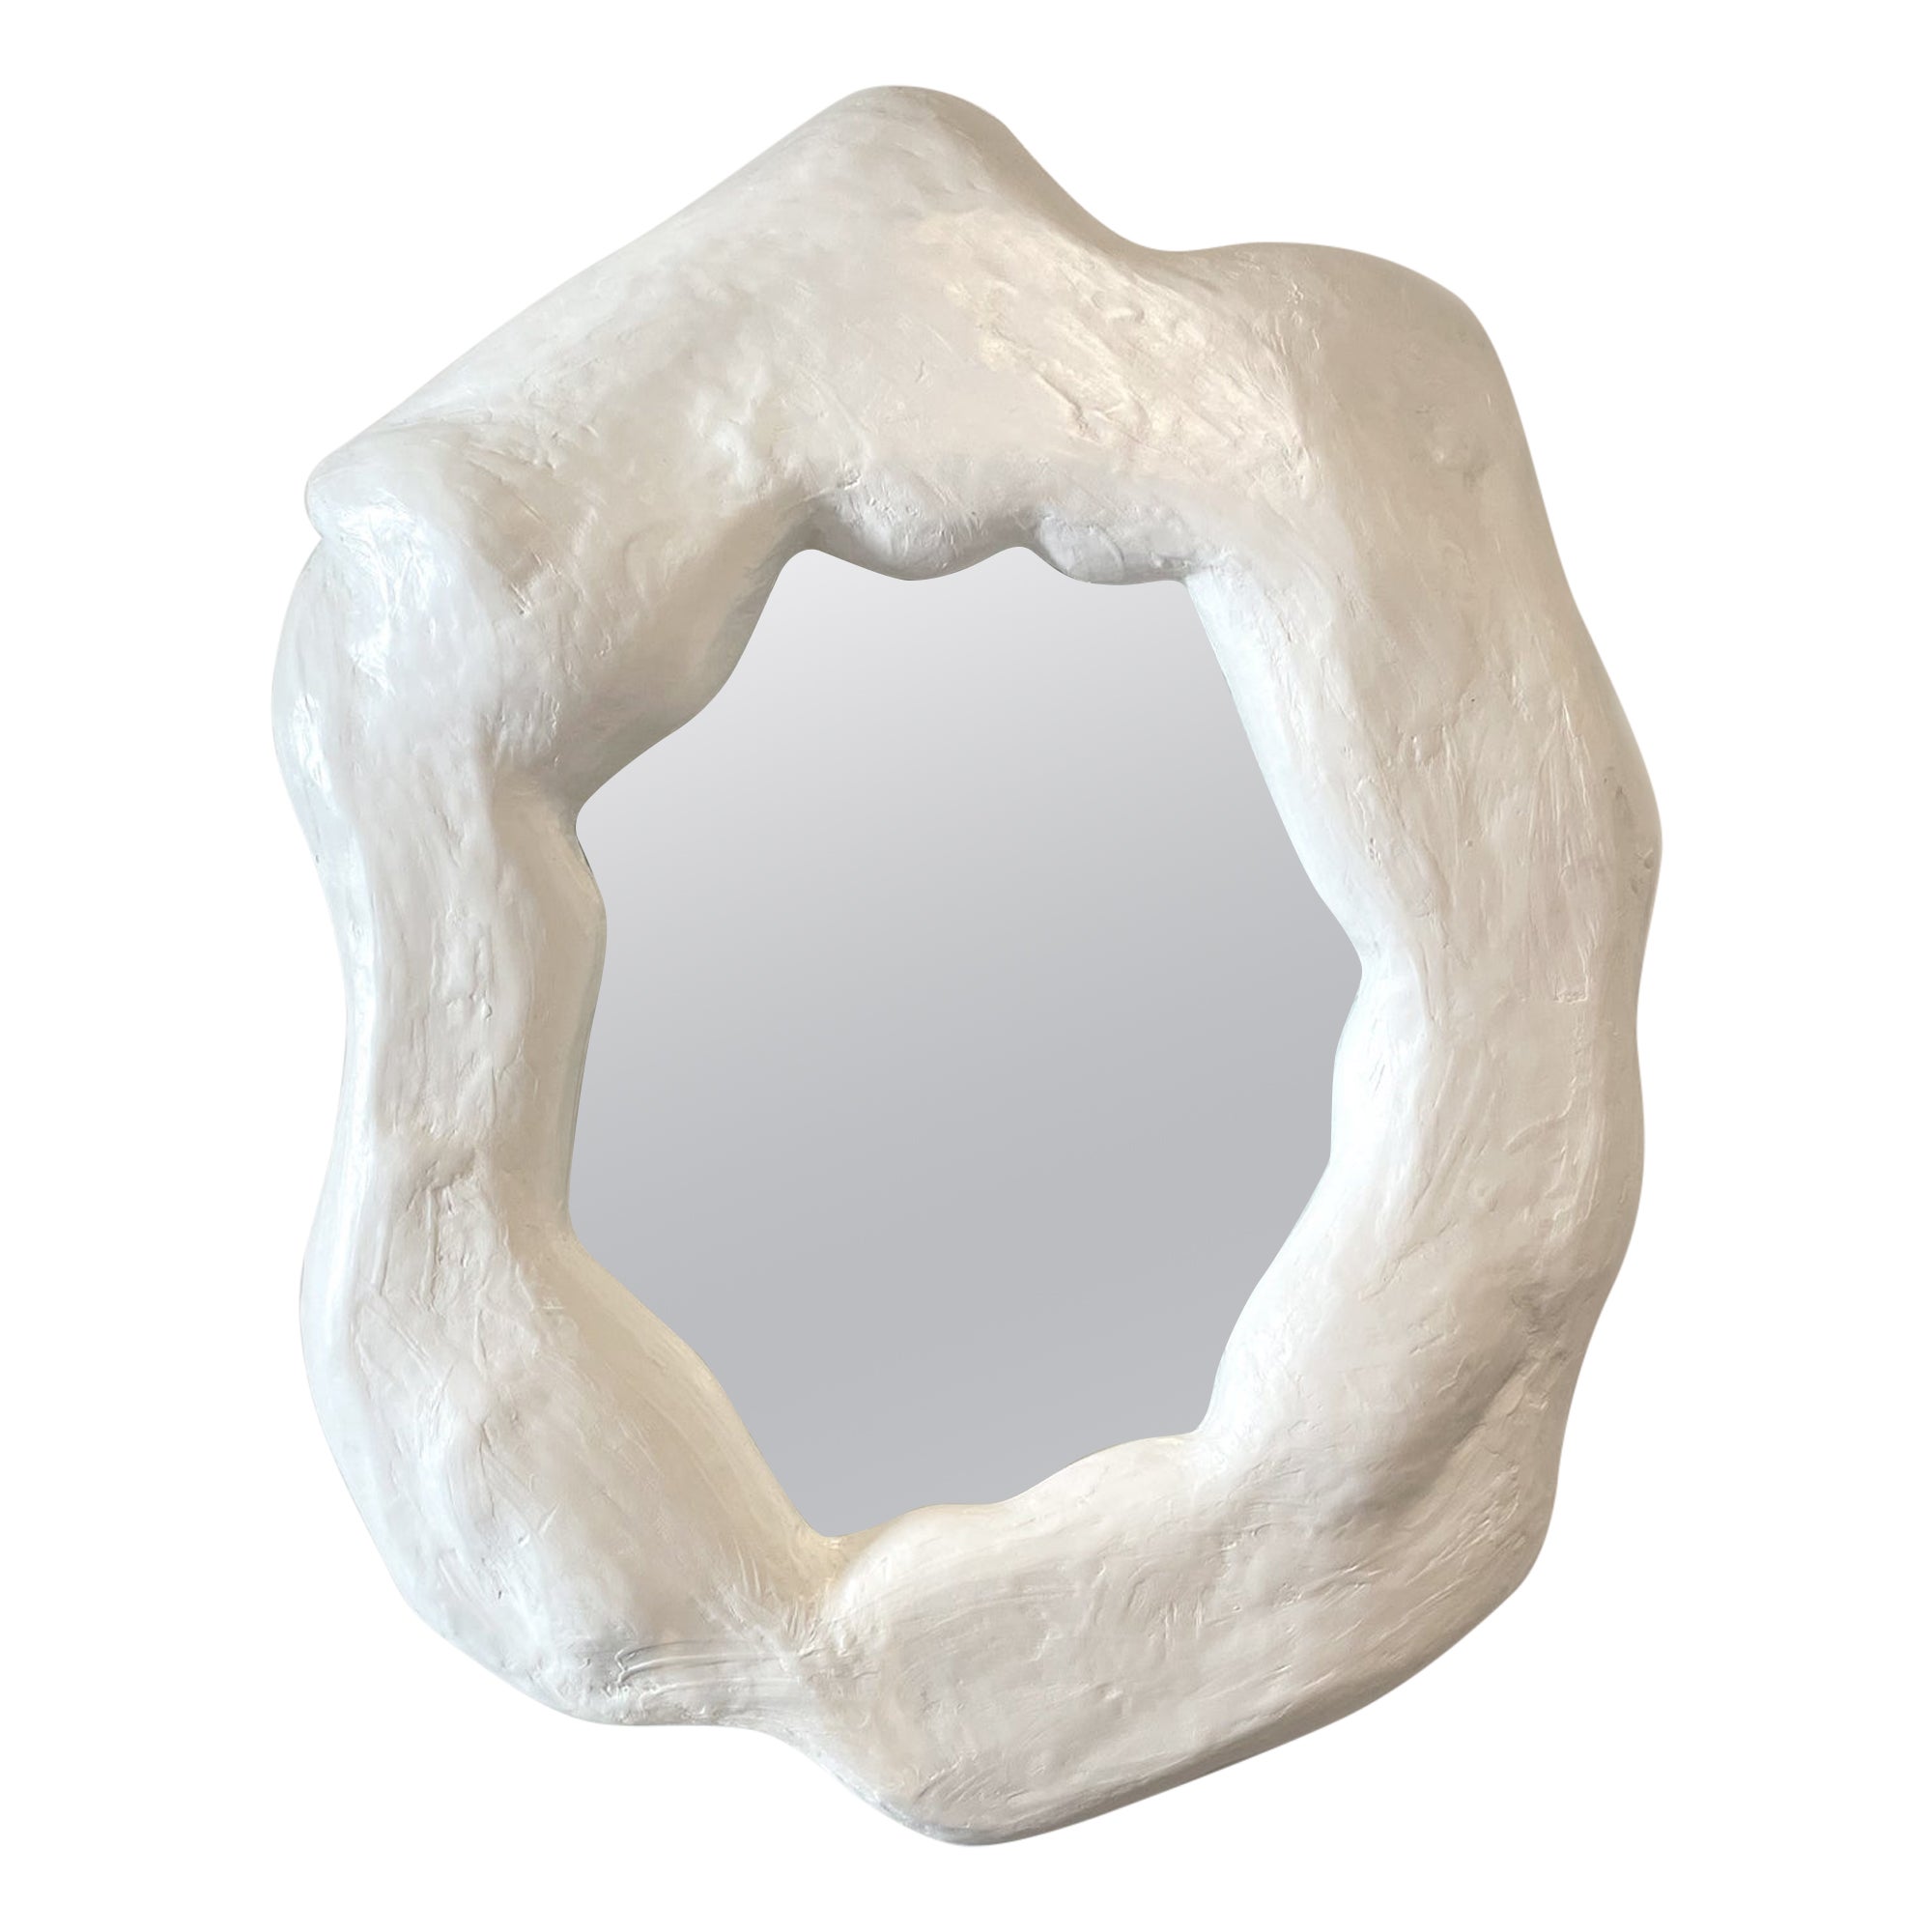 "Iceberg" Functional Wall Mirror Sculpture by Alexey Krupinin For Sale